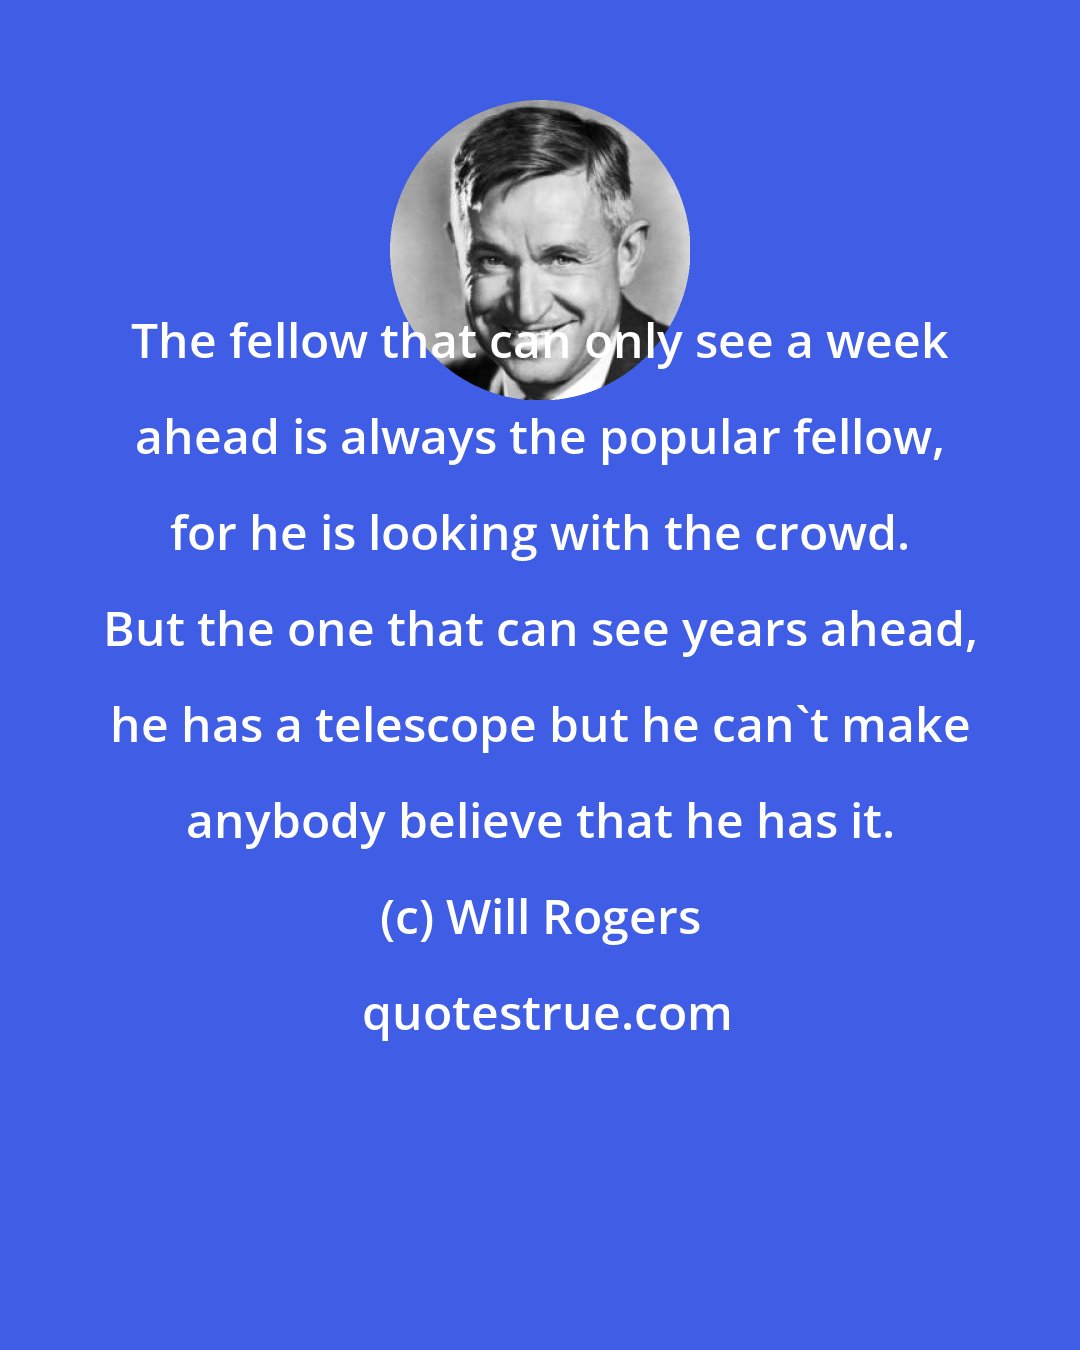 Will Rogers: The fellow that can only see a week ahead is always the popular fellow, for he is looking with the crowd. But the one that can see years ahead, he has a telescope but he can't make anybody believe that he has it.